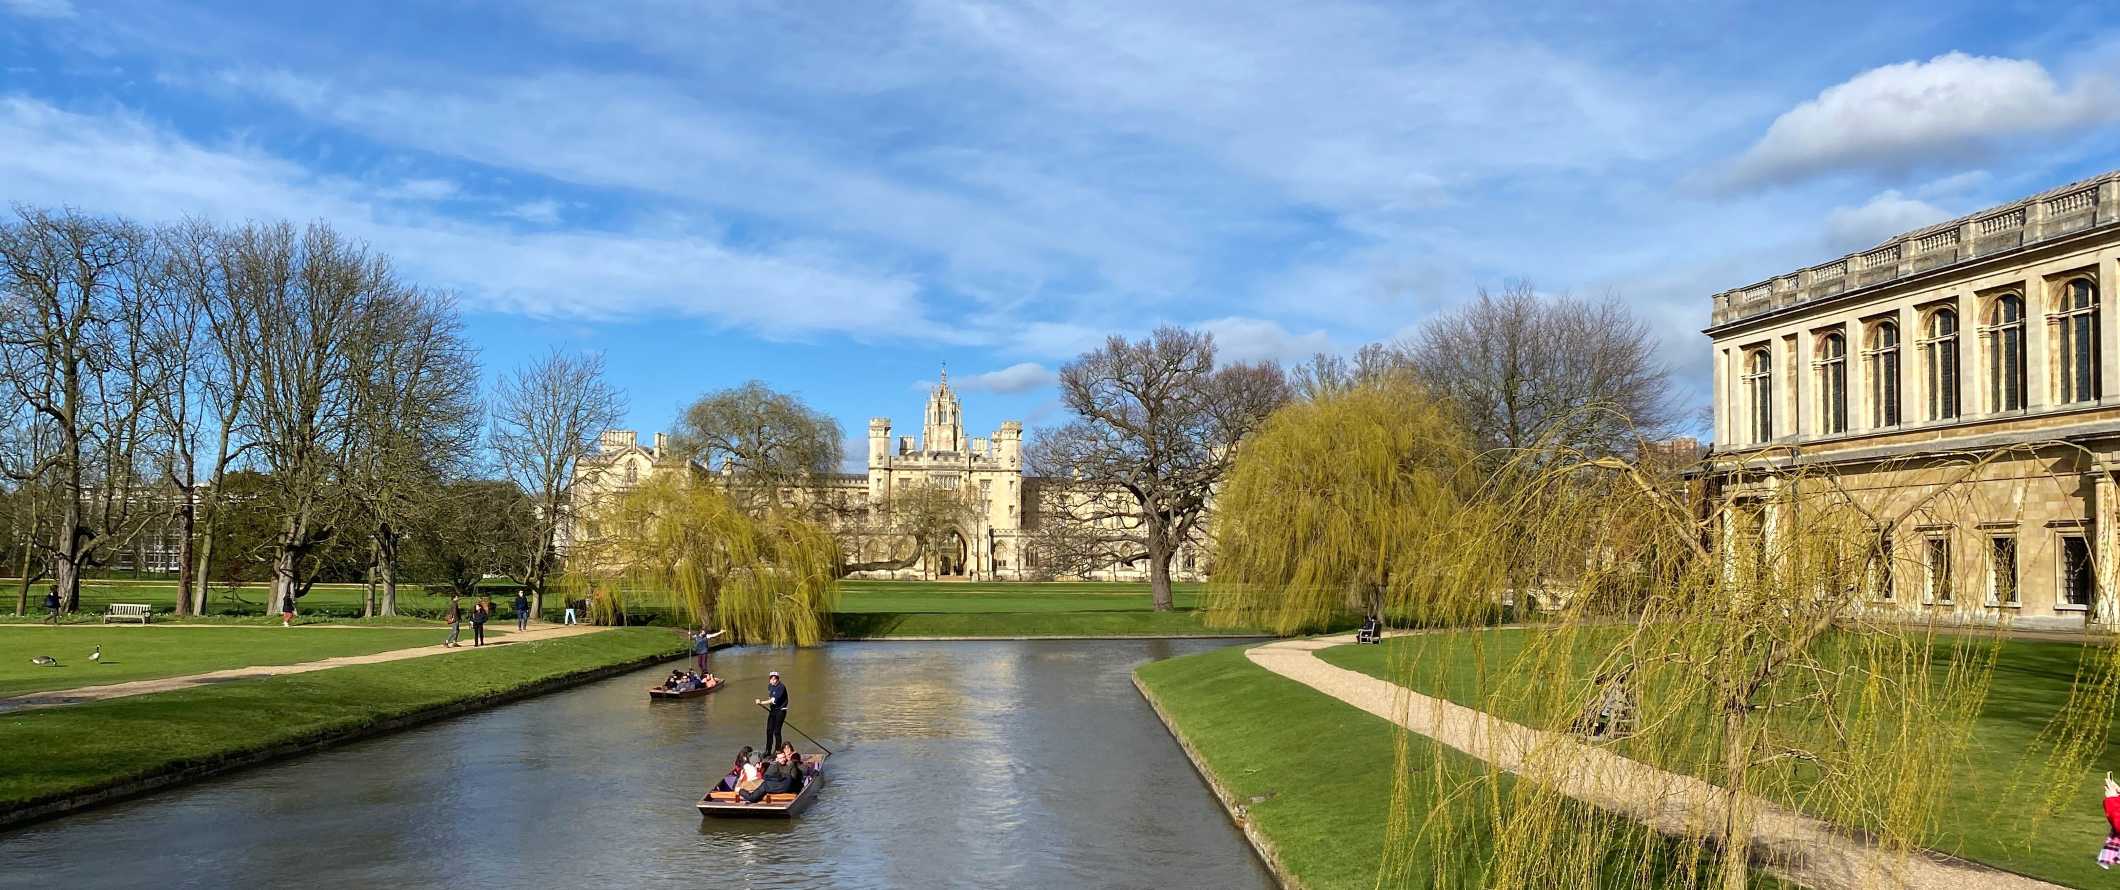 People punting down the river with the buildings of Cambridge University in the background in Cambridge, England